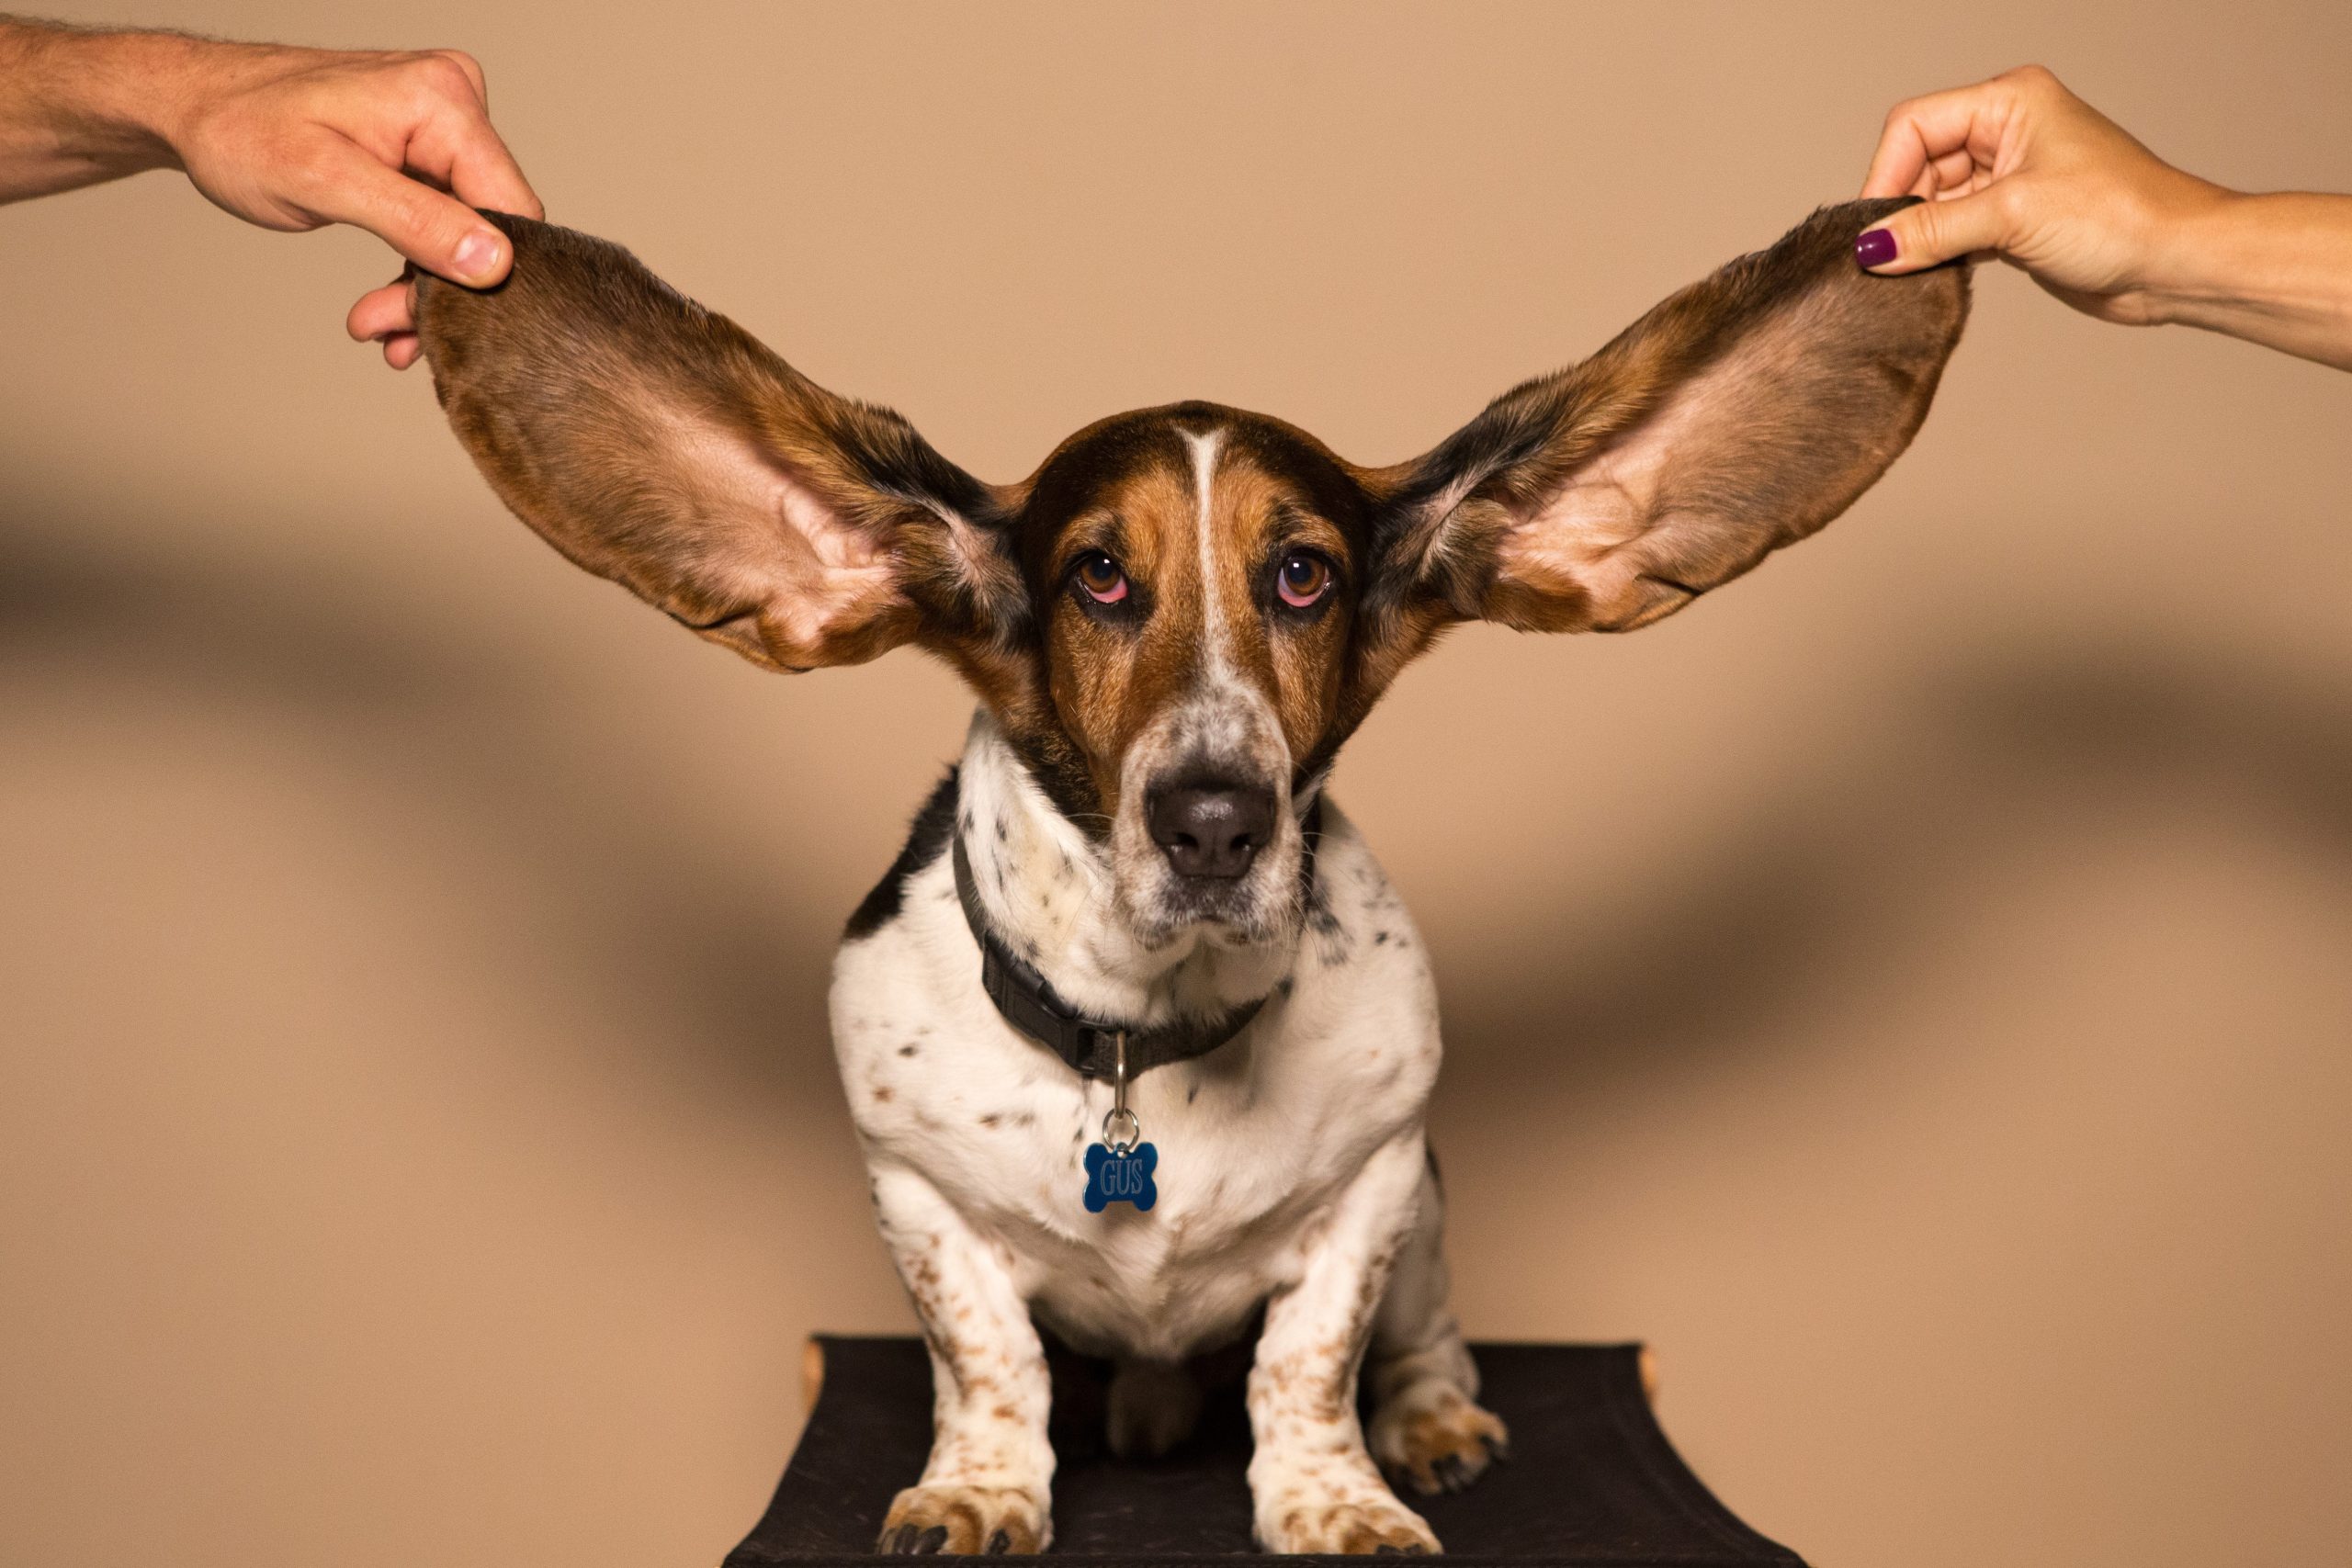 Ear Infections in Dogs: Understanding, Treating, and Preventing Otitis Externa